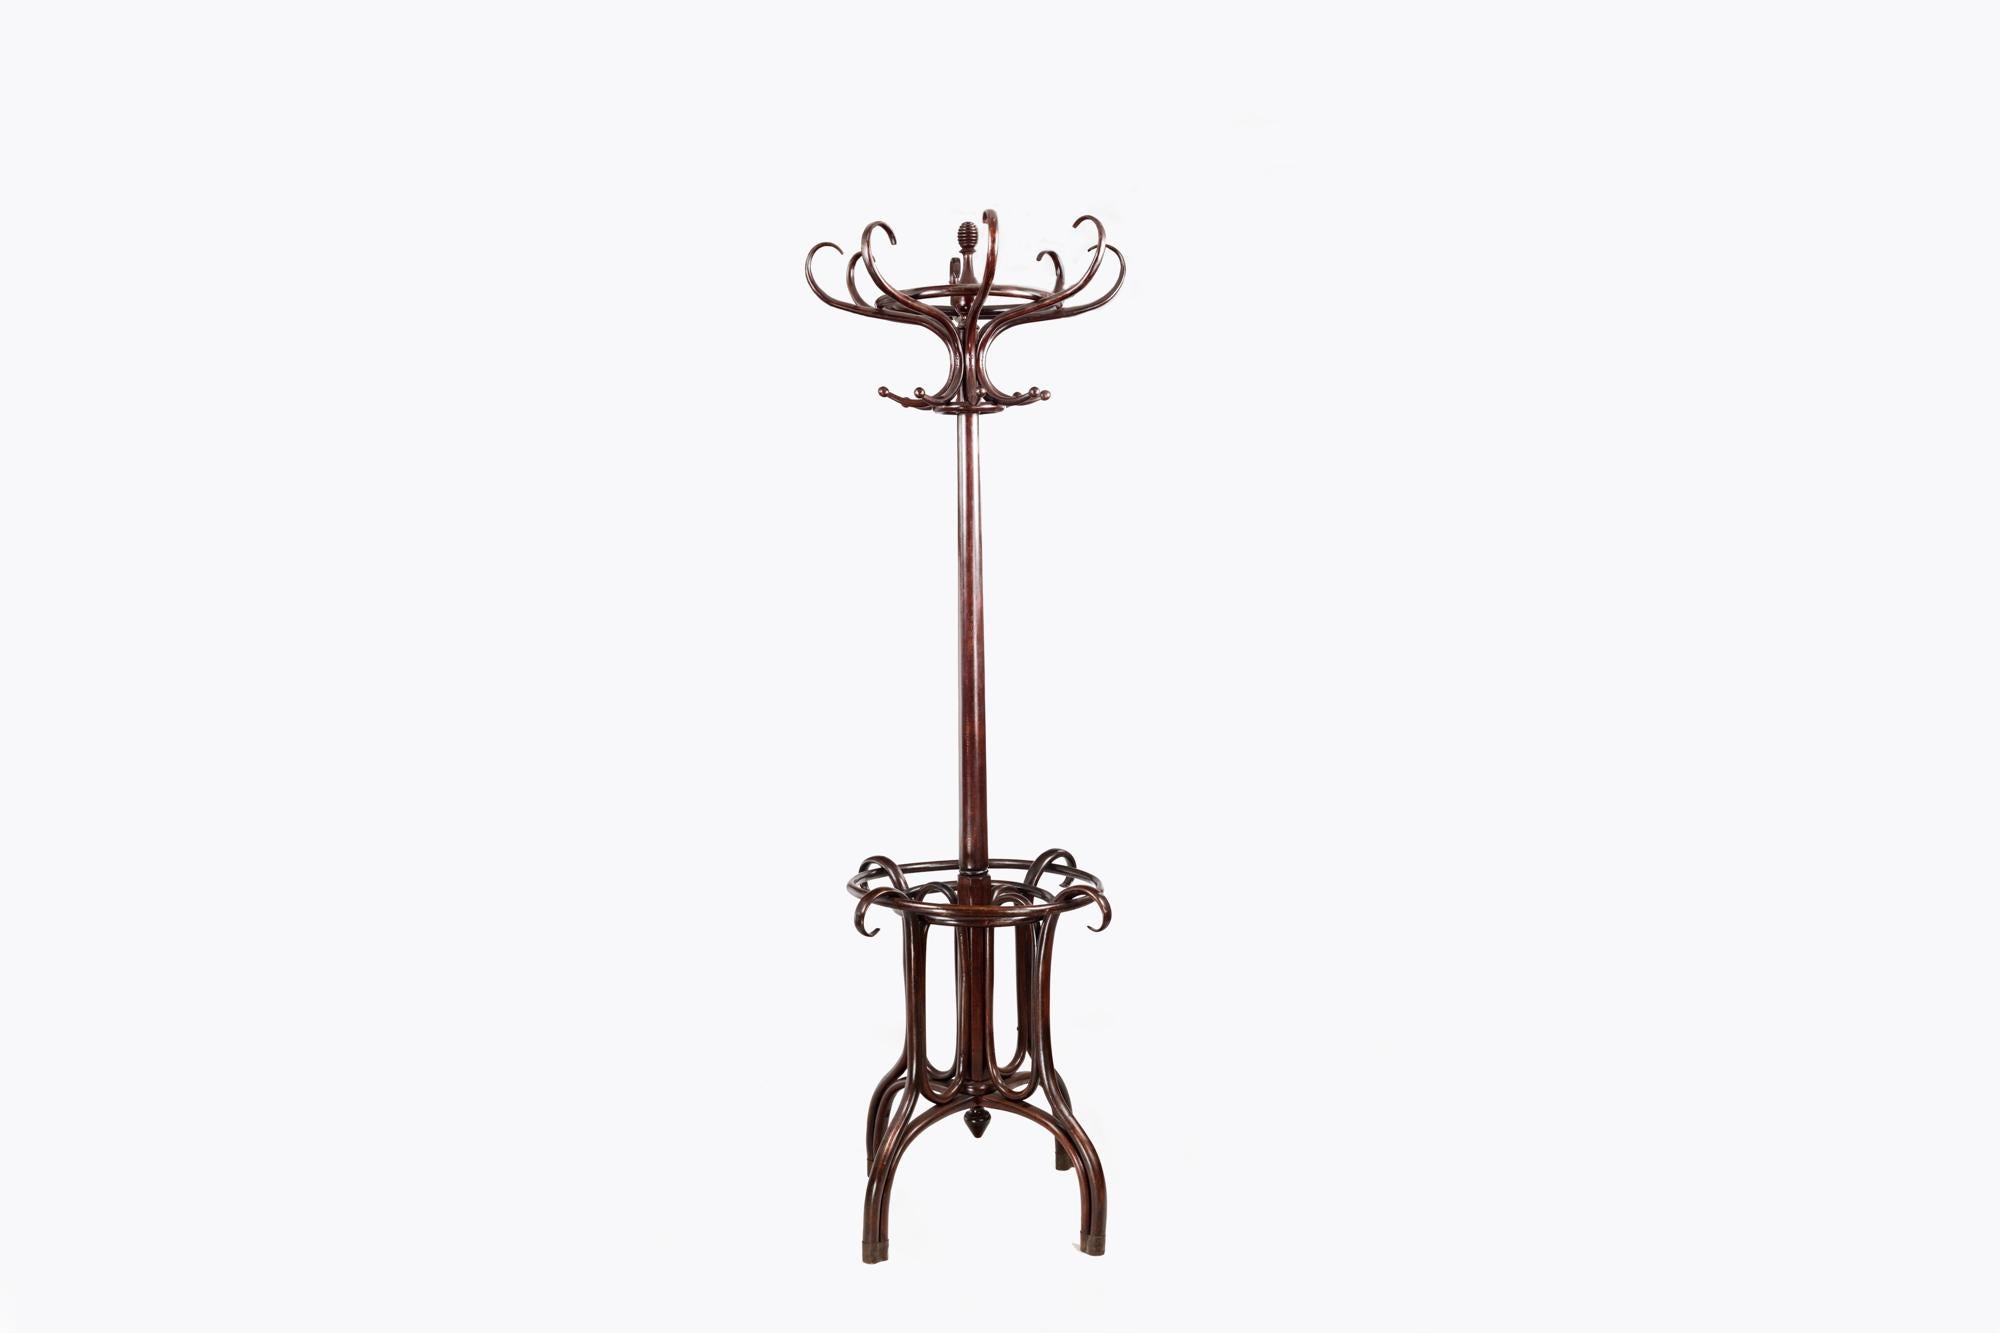 19th Century Bentwood hat and coat stand complete with unusual incorporated umbrella rack terminating on four swept bentwood legs and finished by a matching return finial on the base of the column. The upper crown of 8 double ended hooks for hats